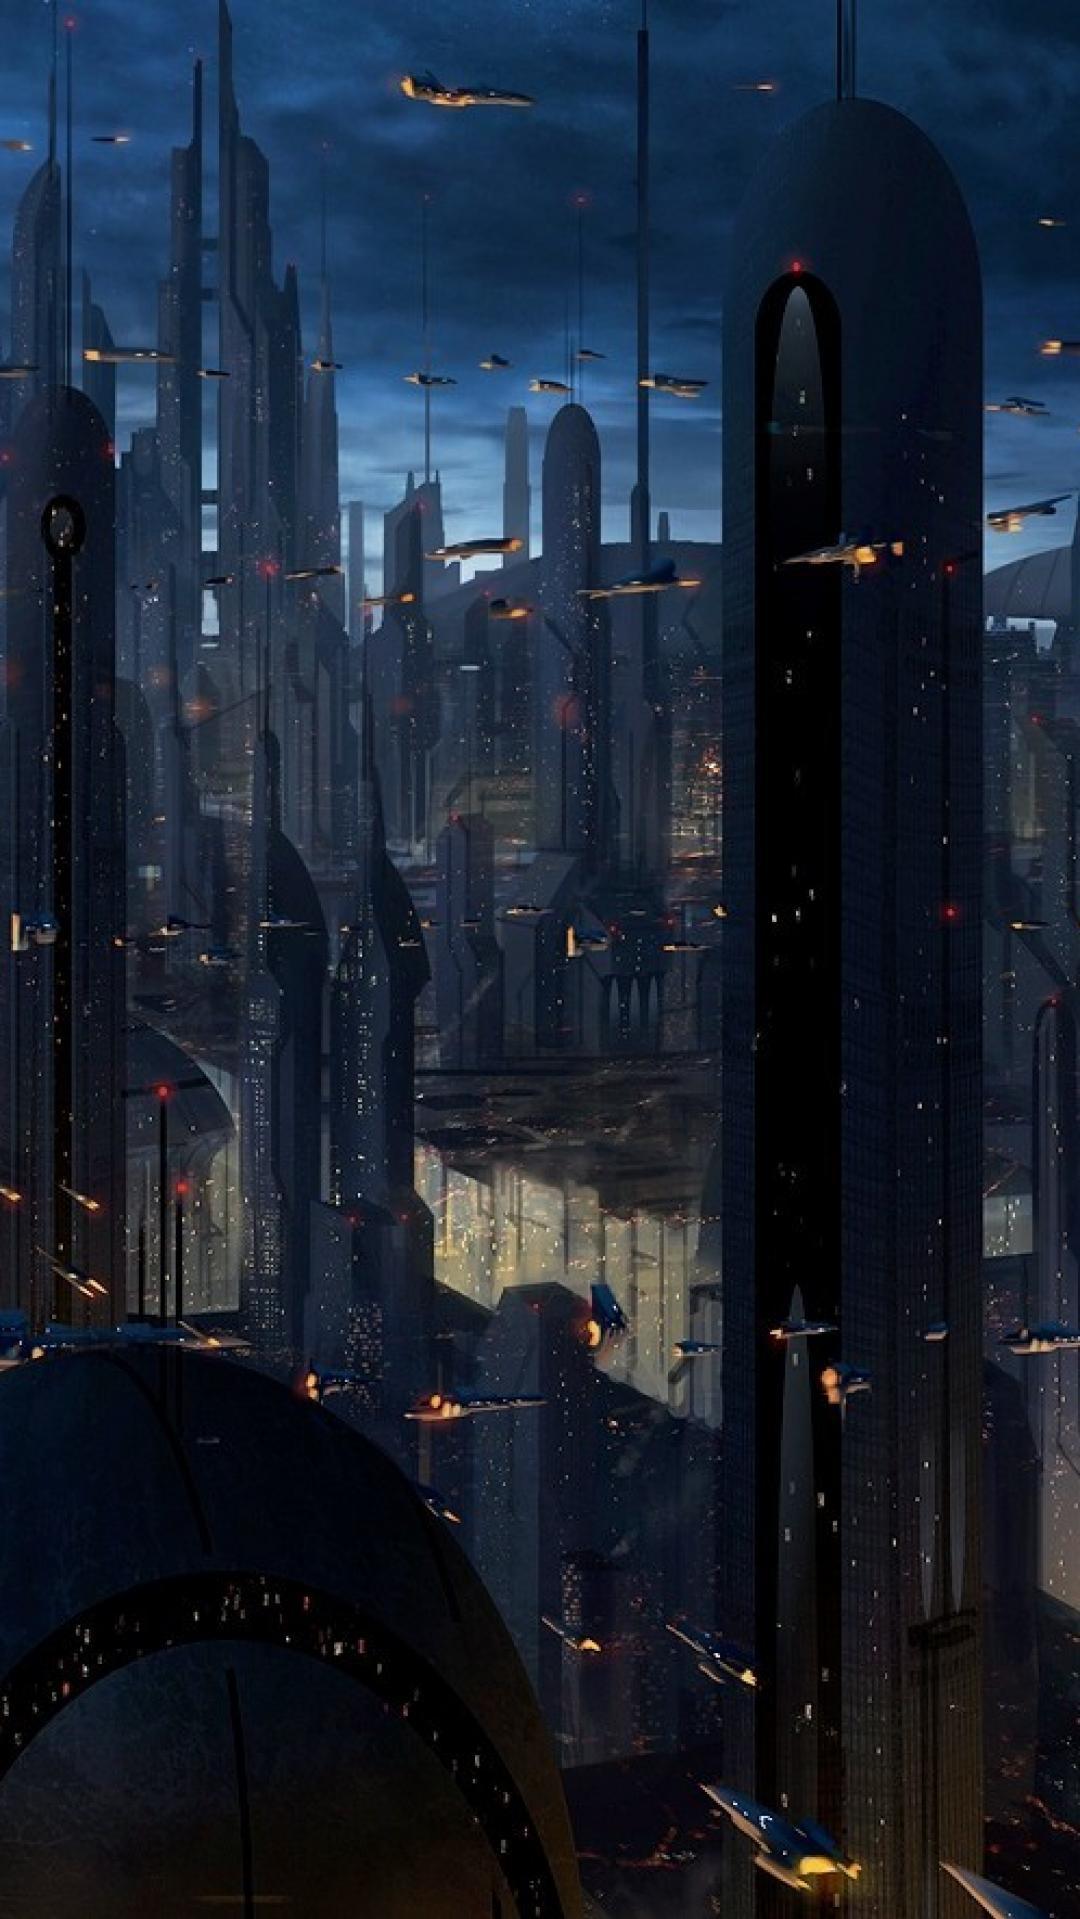 Free download Coruscant star wars artwork buildings cityscapes